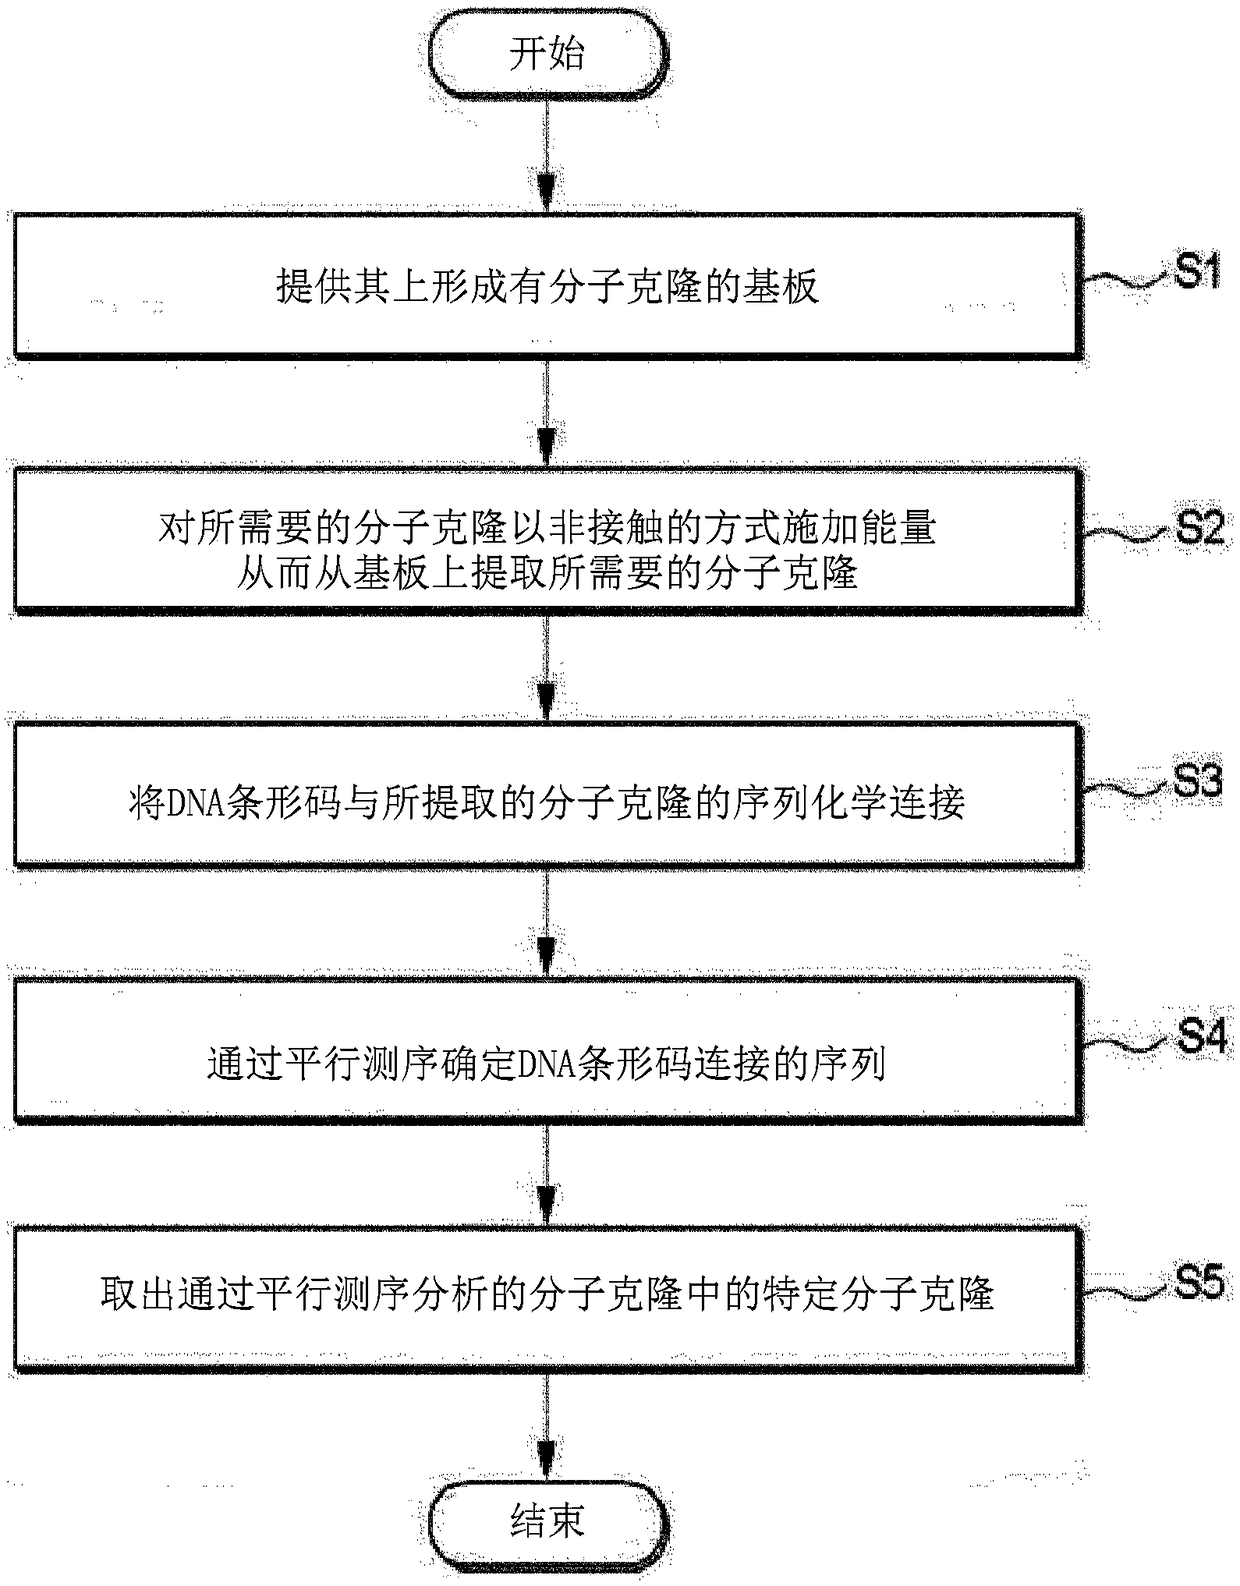 Molecular clone extracting and verifying method